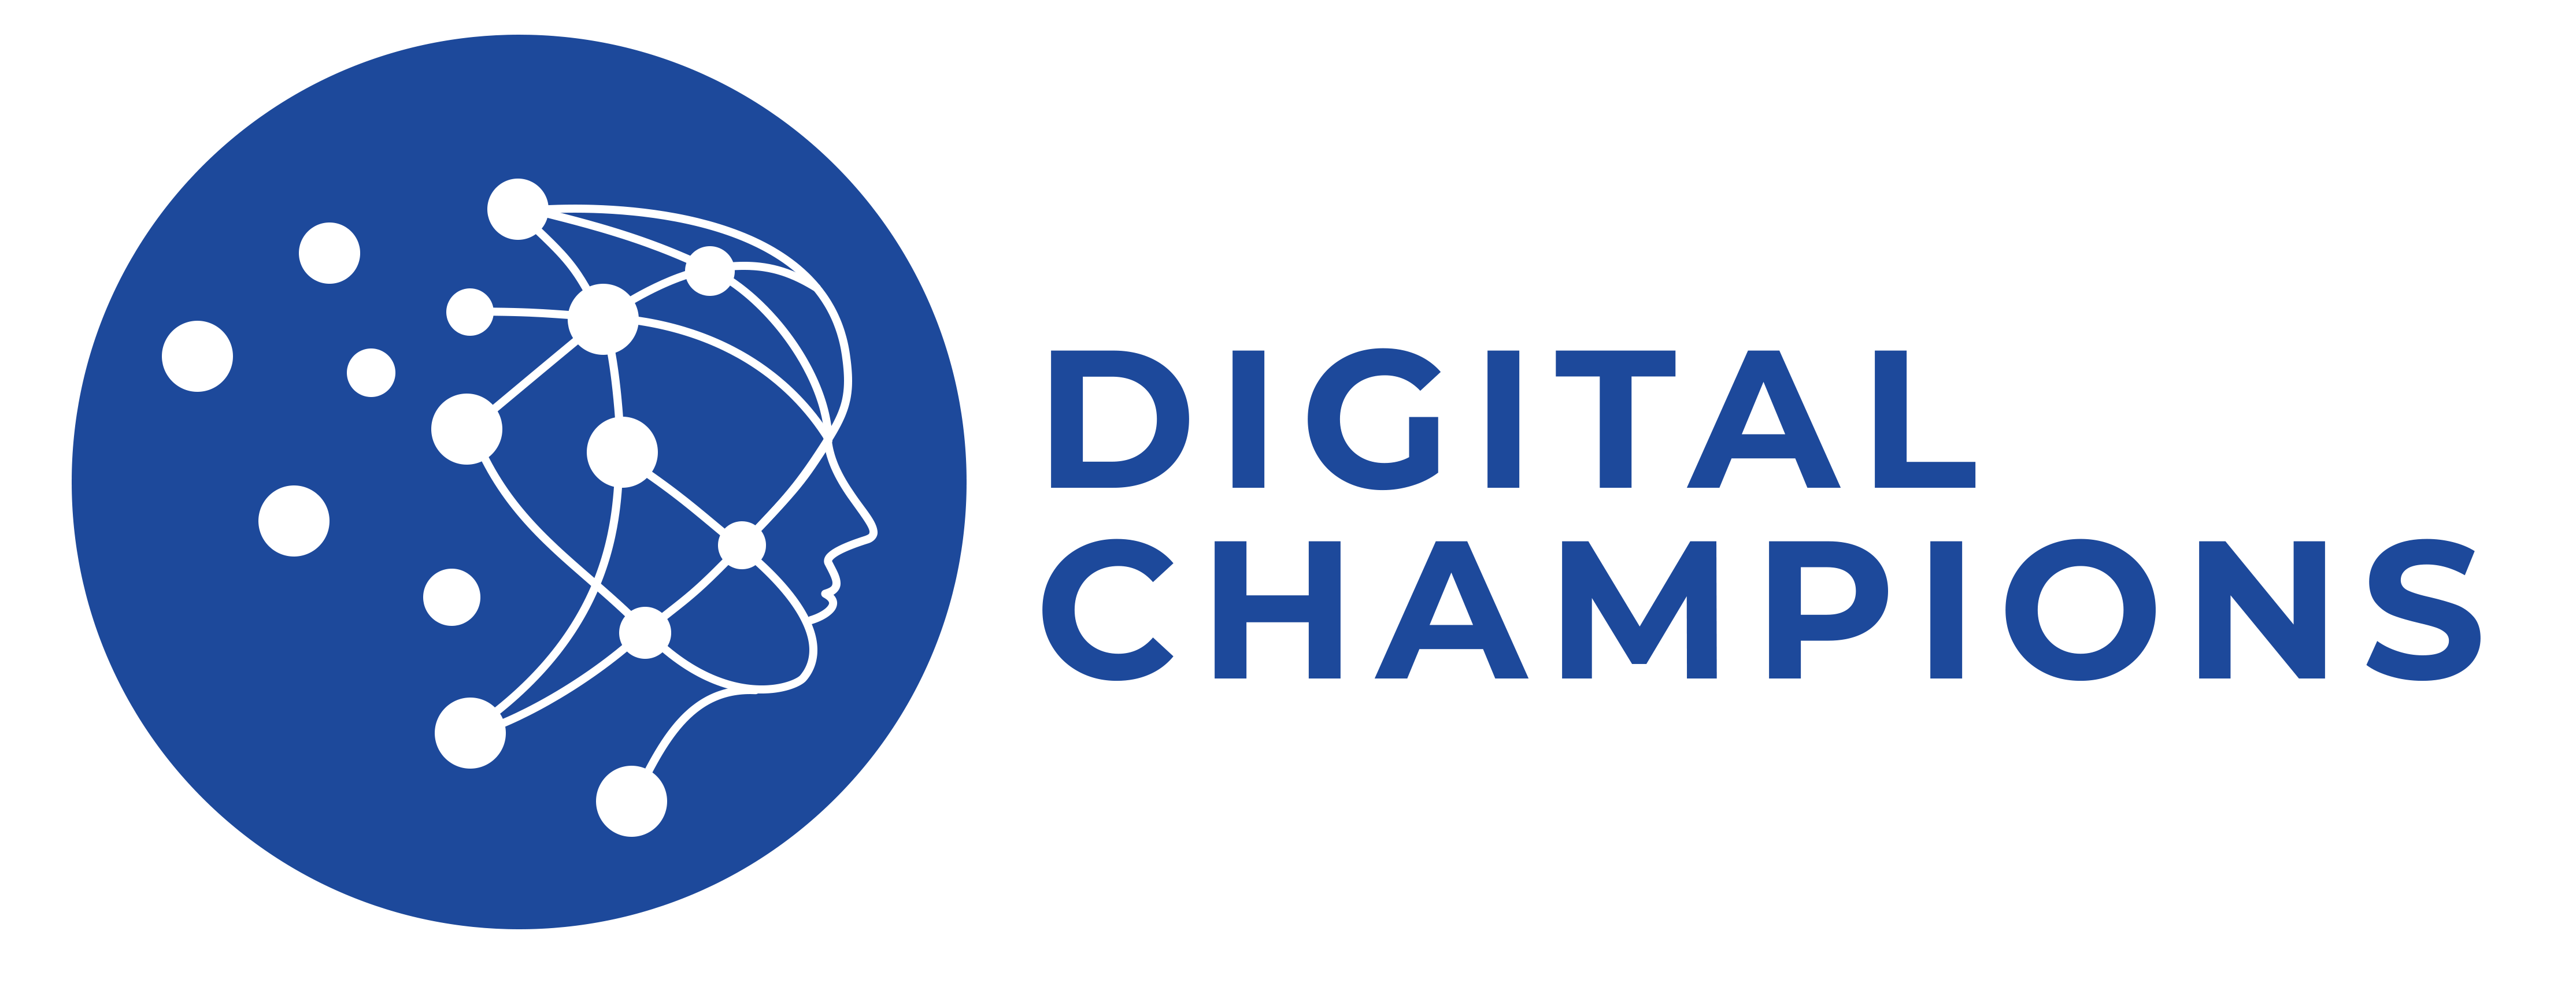 Digital champions logo. Blue circle with outline of a face in white, white spots in the brain area. Digital champions in blue